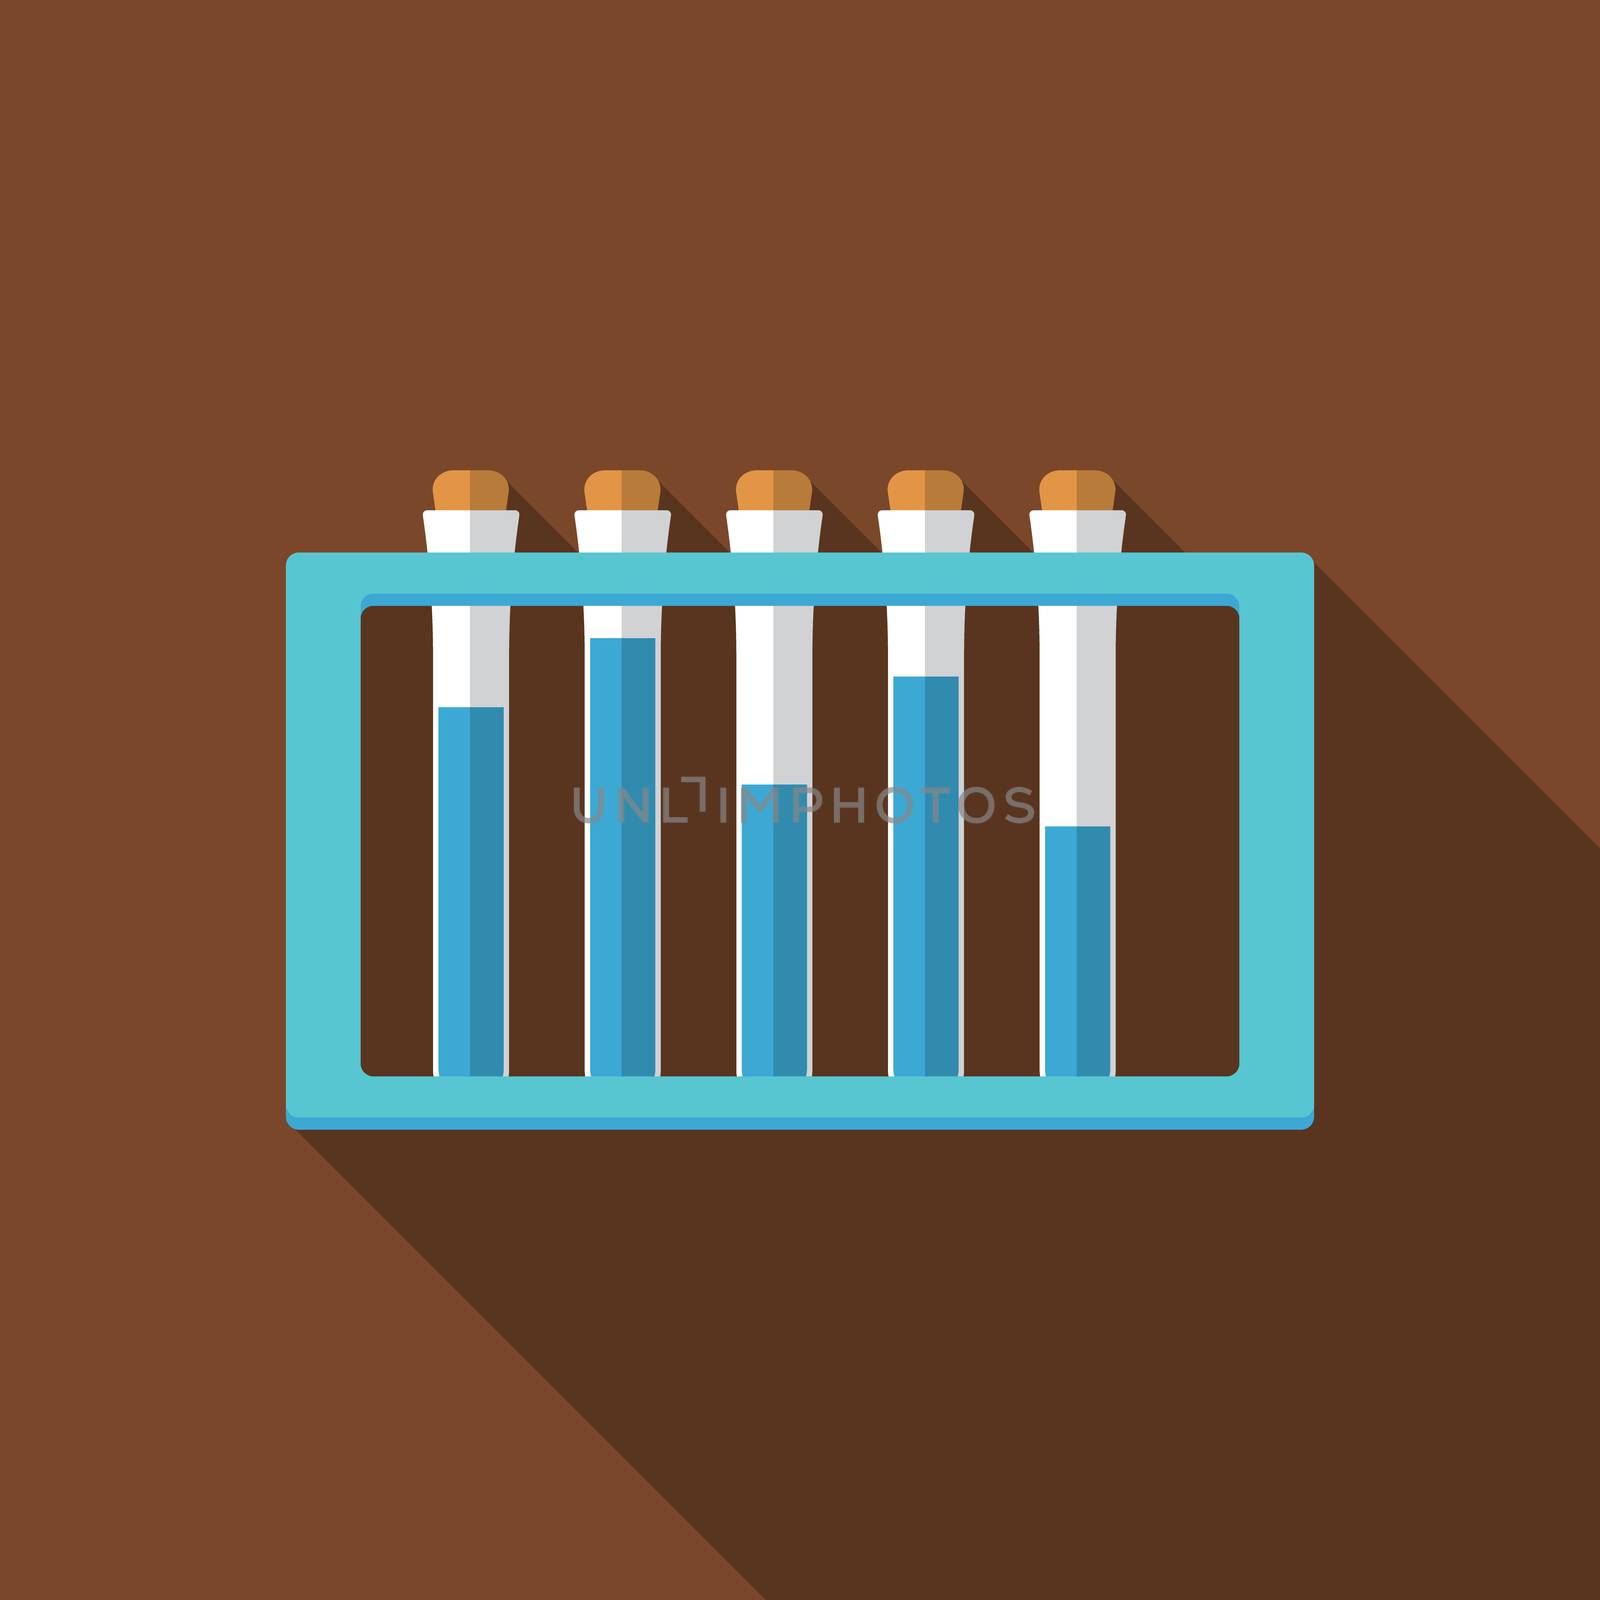 Flat design modern vector illustration of laboratory samples icon with long shadow.